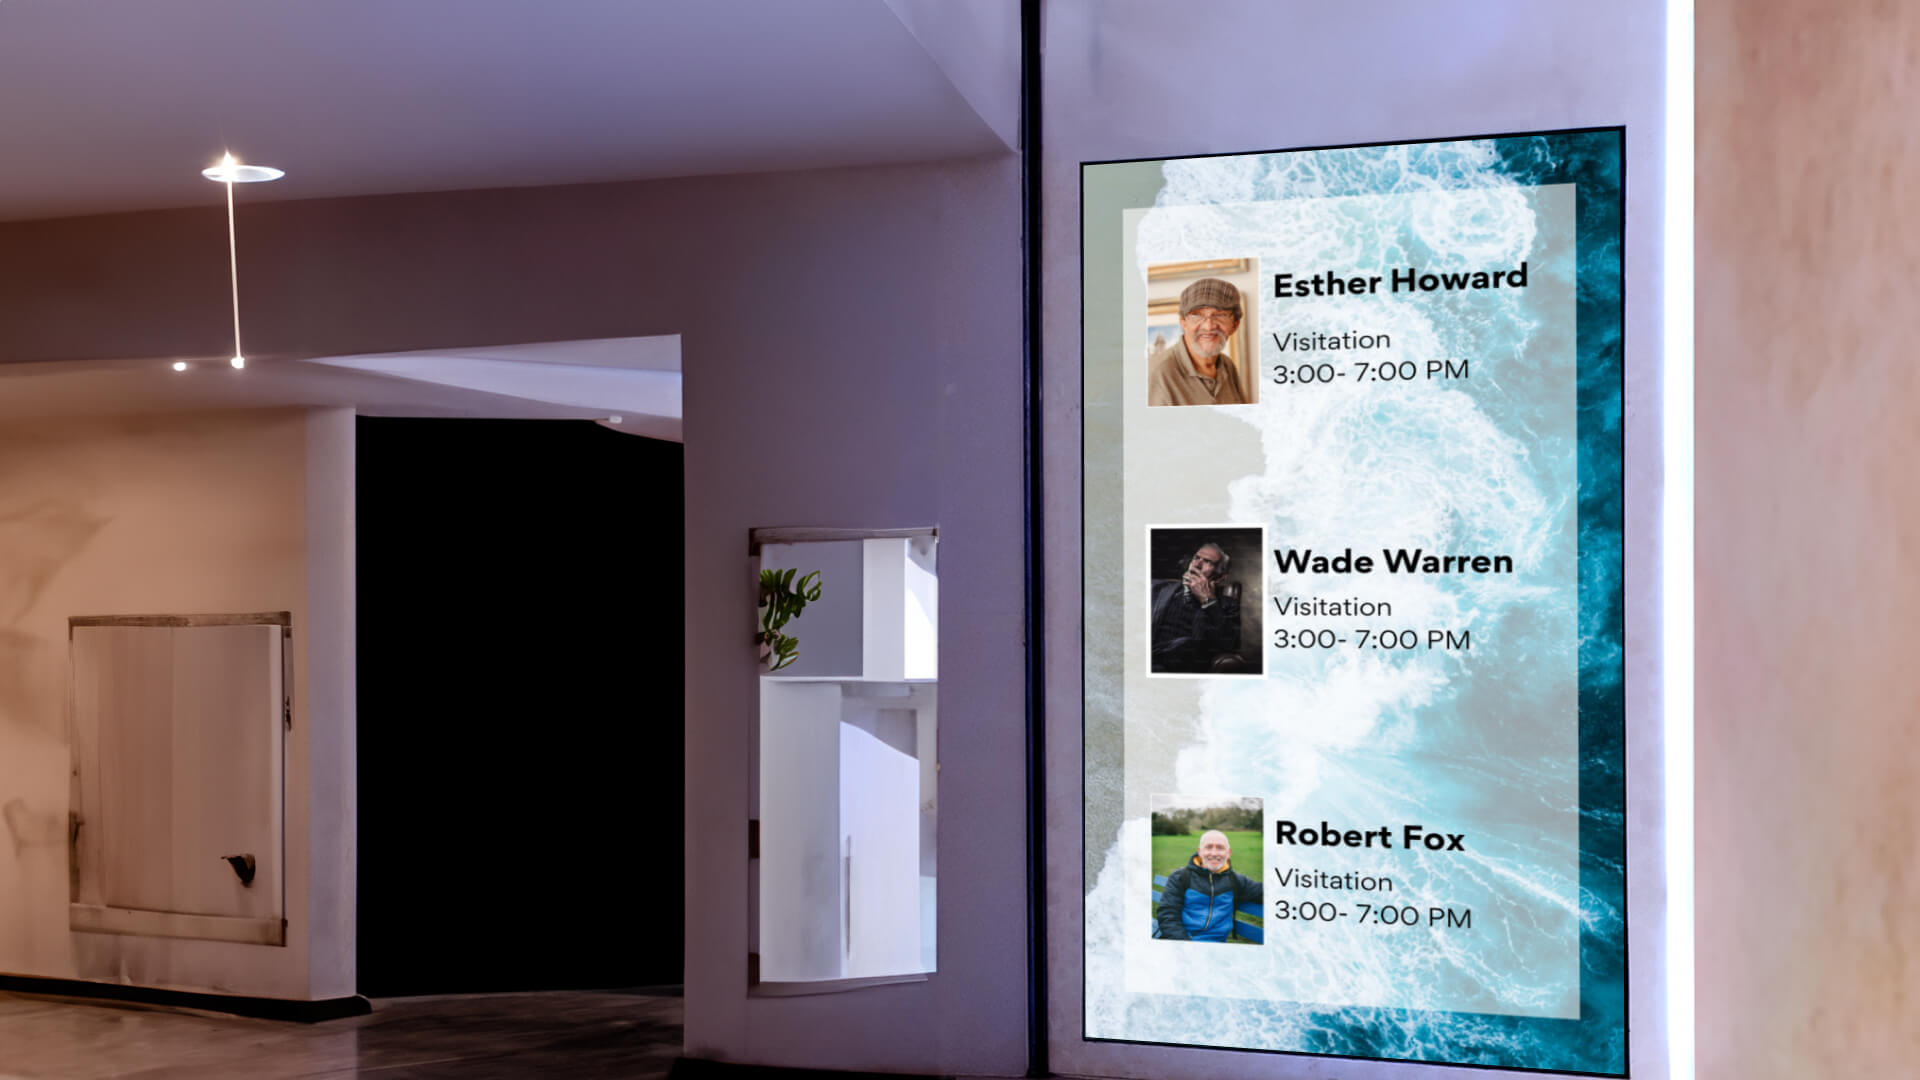  Digital signage in funeral homes used for environmental benefits and cost savings.